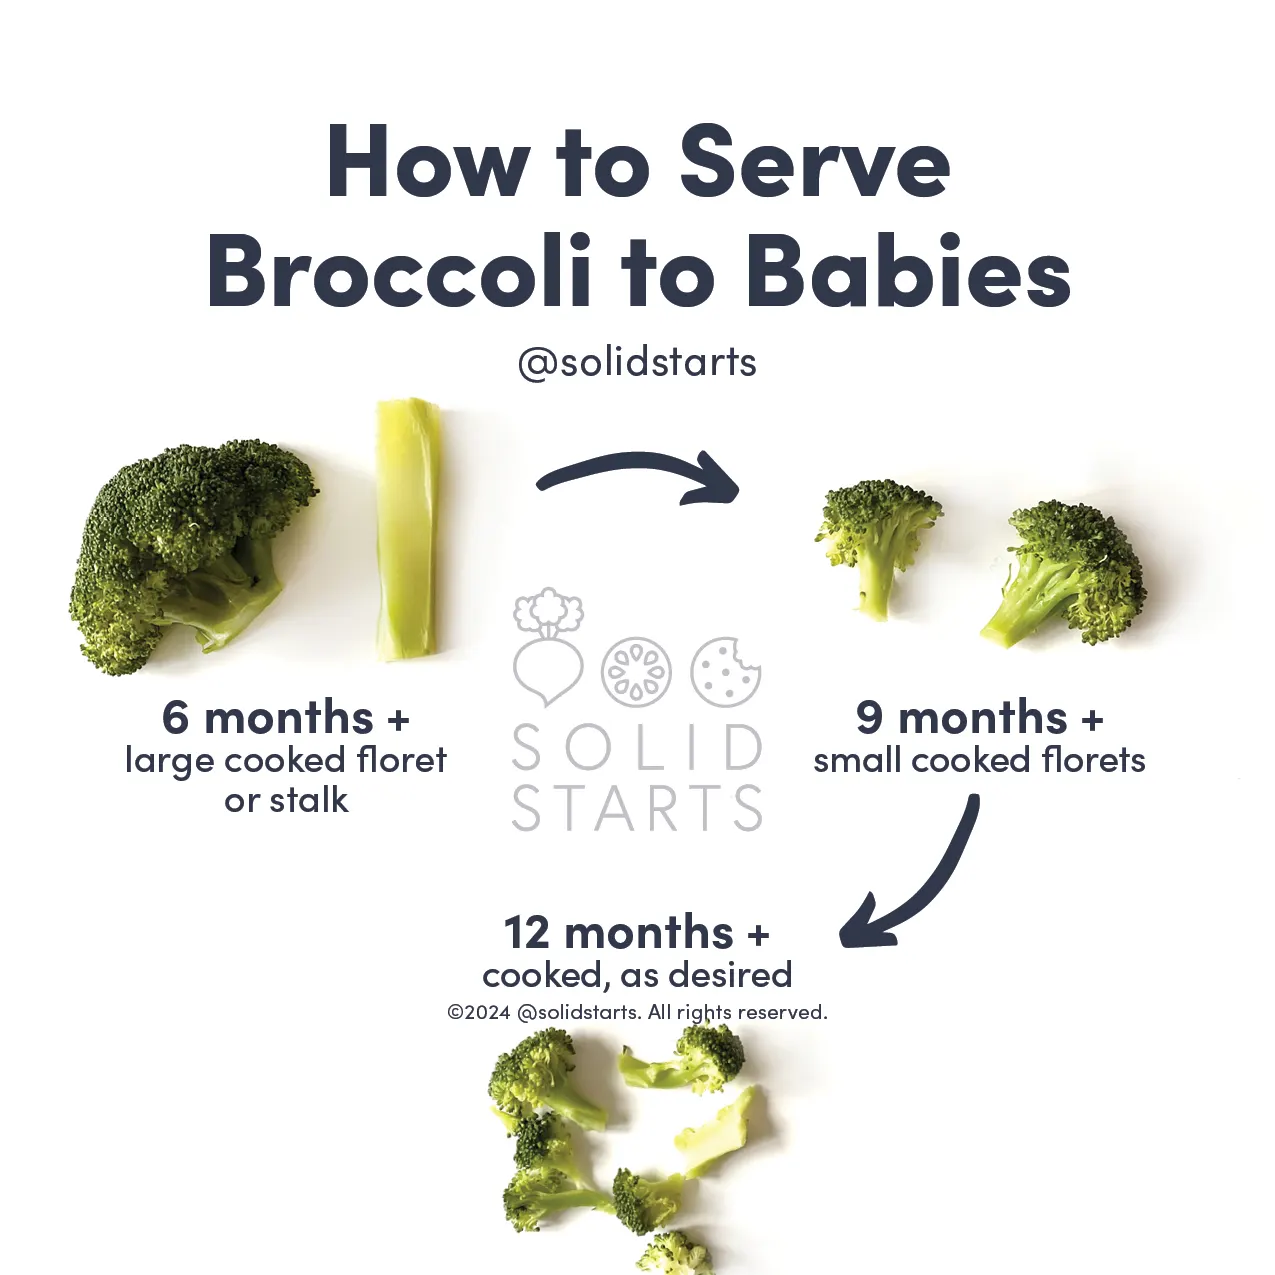 an infographic describing how to prepare broccoli for babies: large steamed florets or stalks for babies 6 months+, smaller steamed florets for babies 9 months+, and bite-sized pieces, which can be cooked less, for toddlers 12 months+